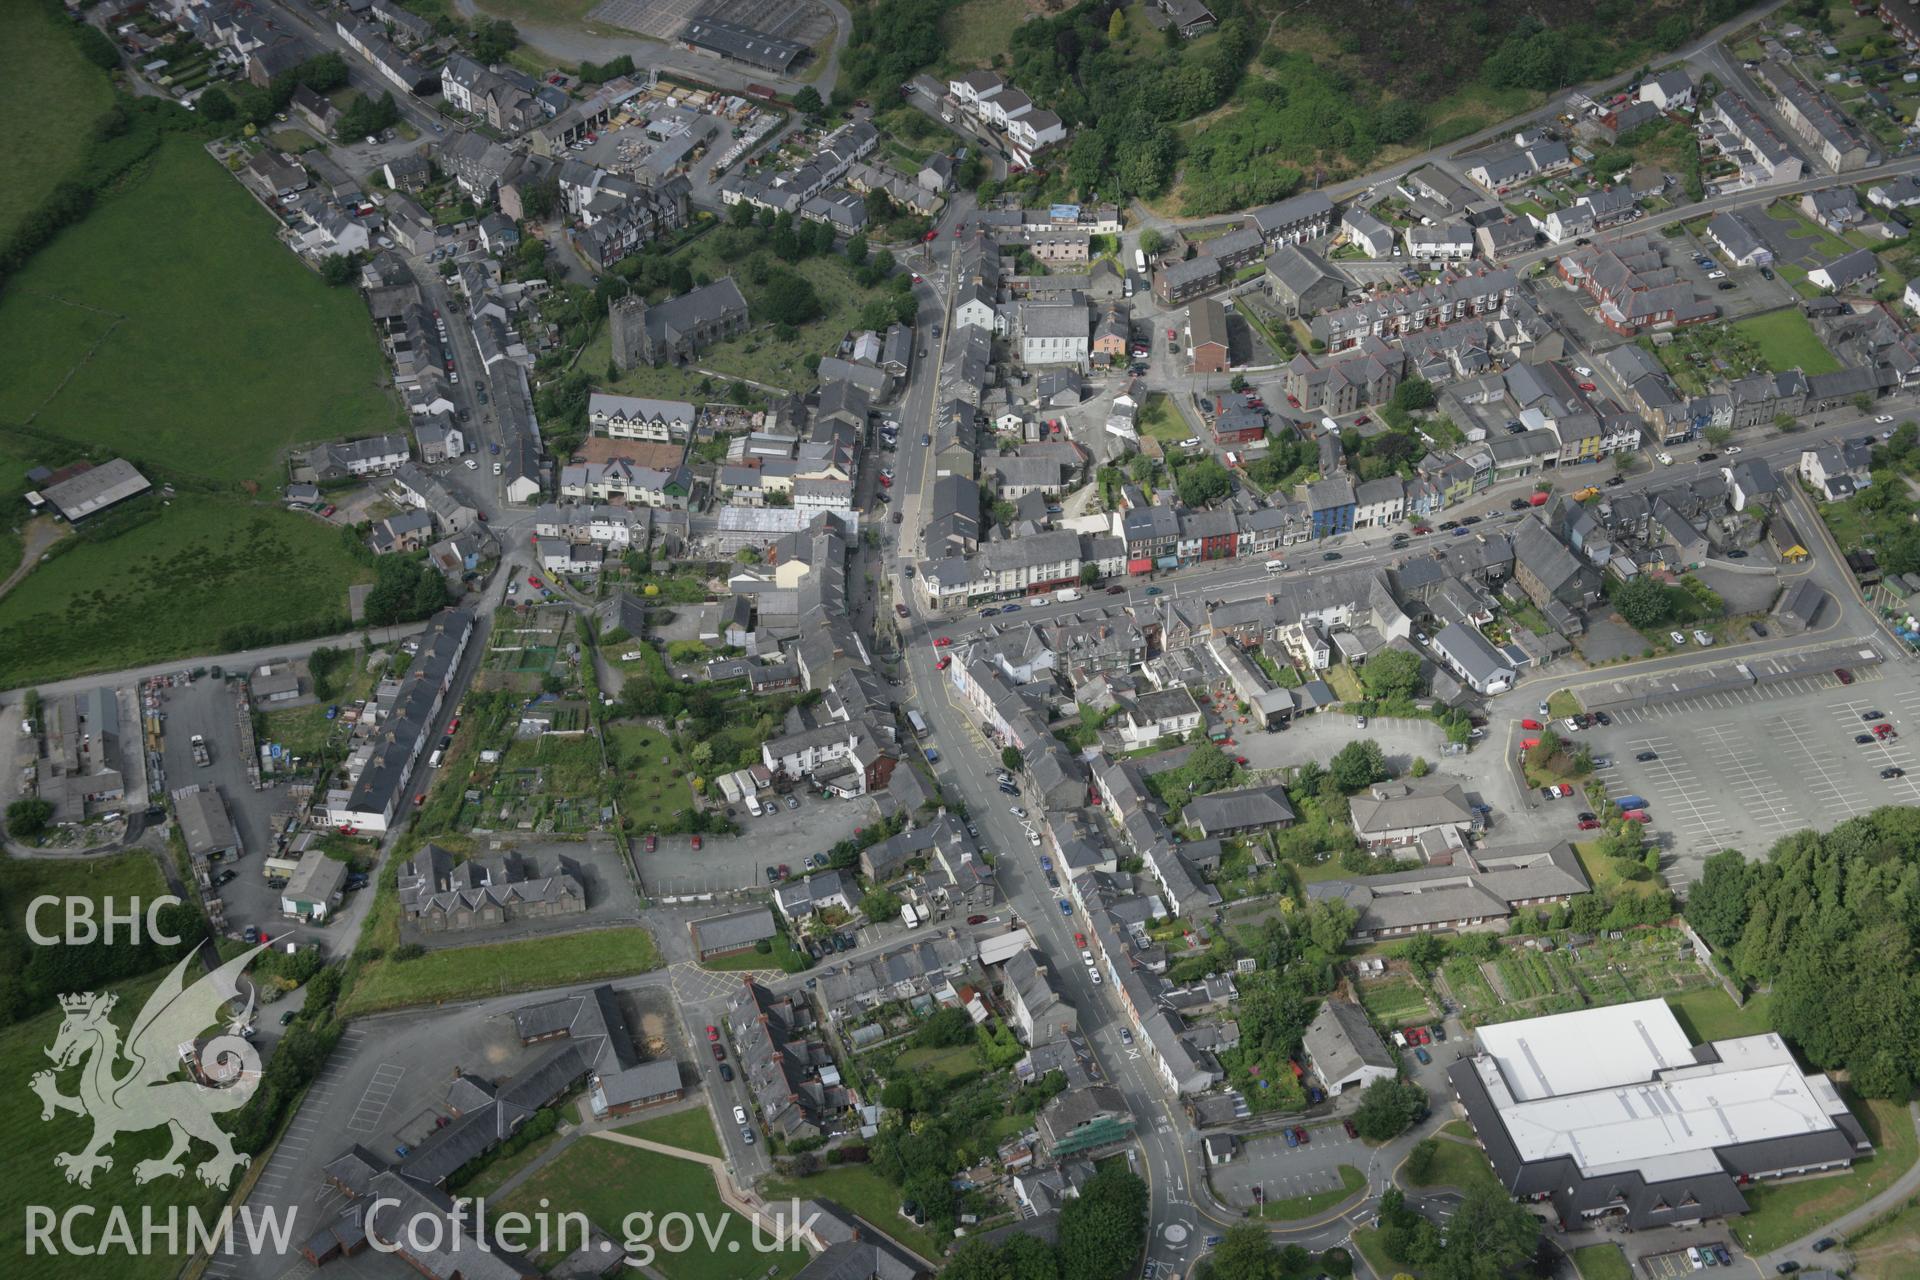 RCAHMW digital colour oblique photograph of Machynlleth from the south. Taken on 18/07/2005 by T.G. Driver.